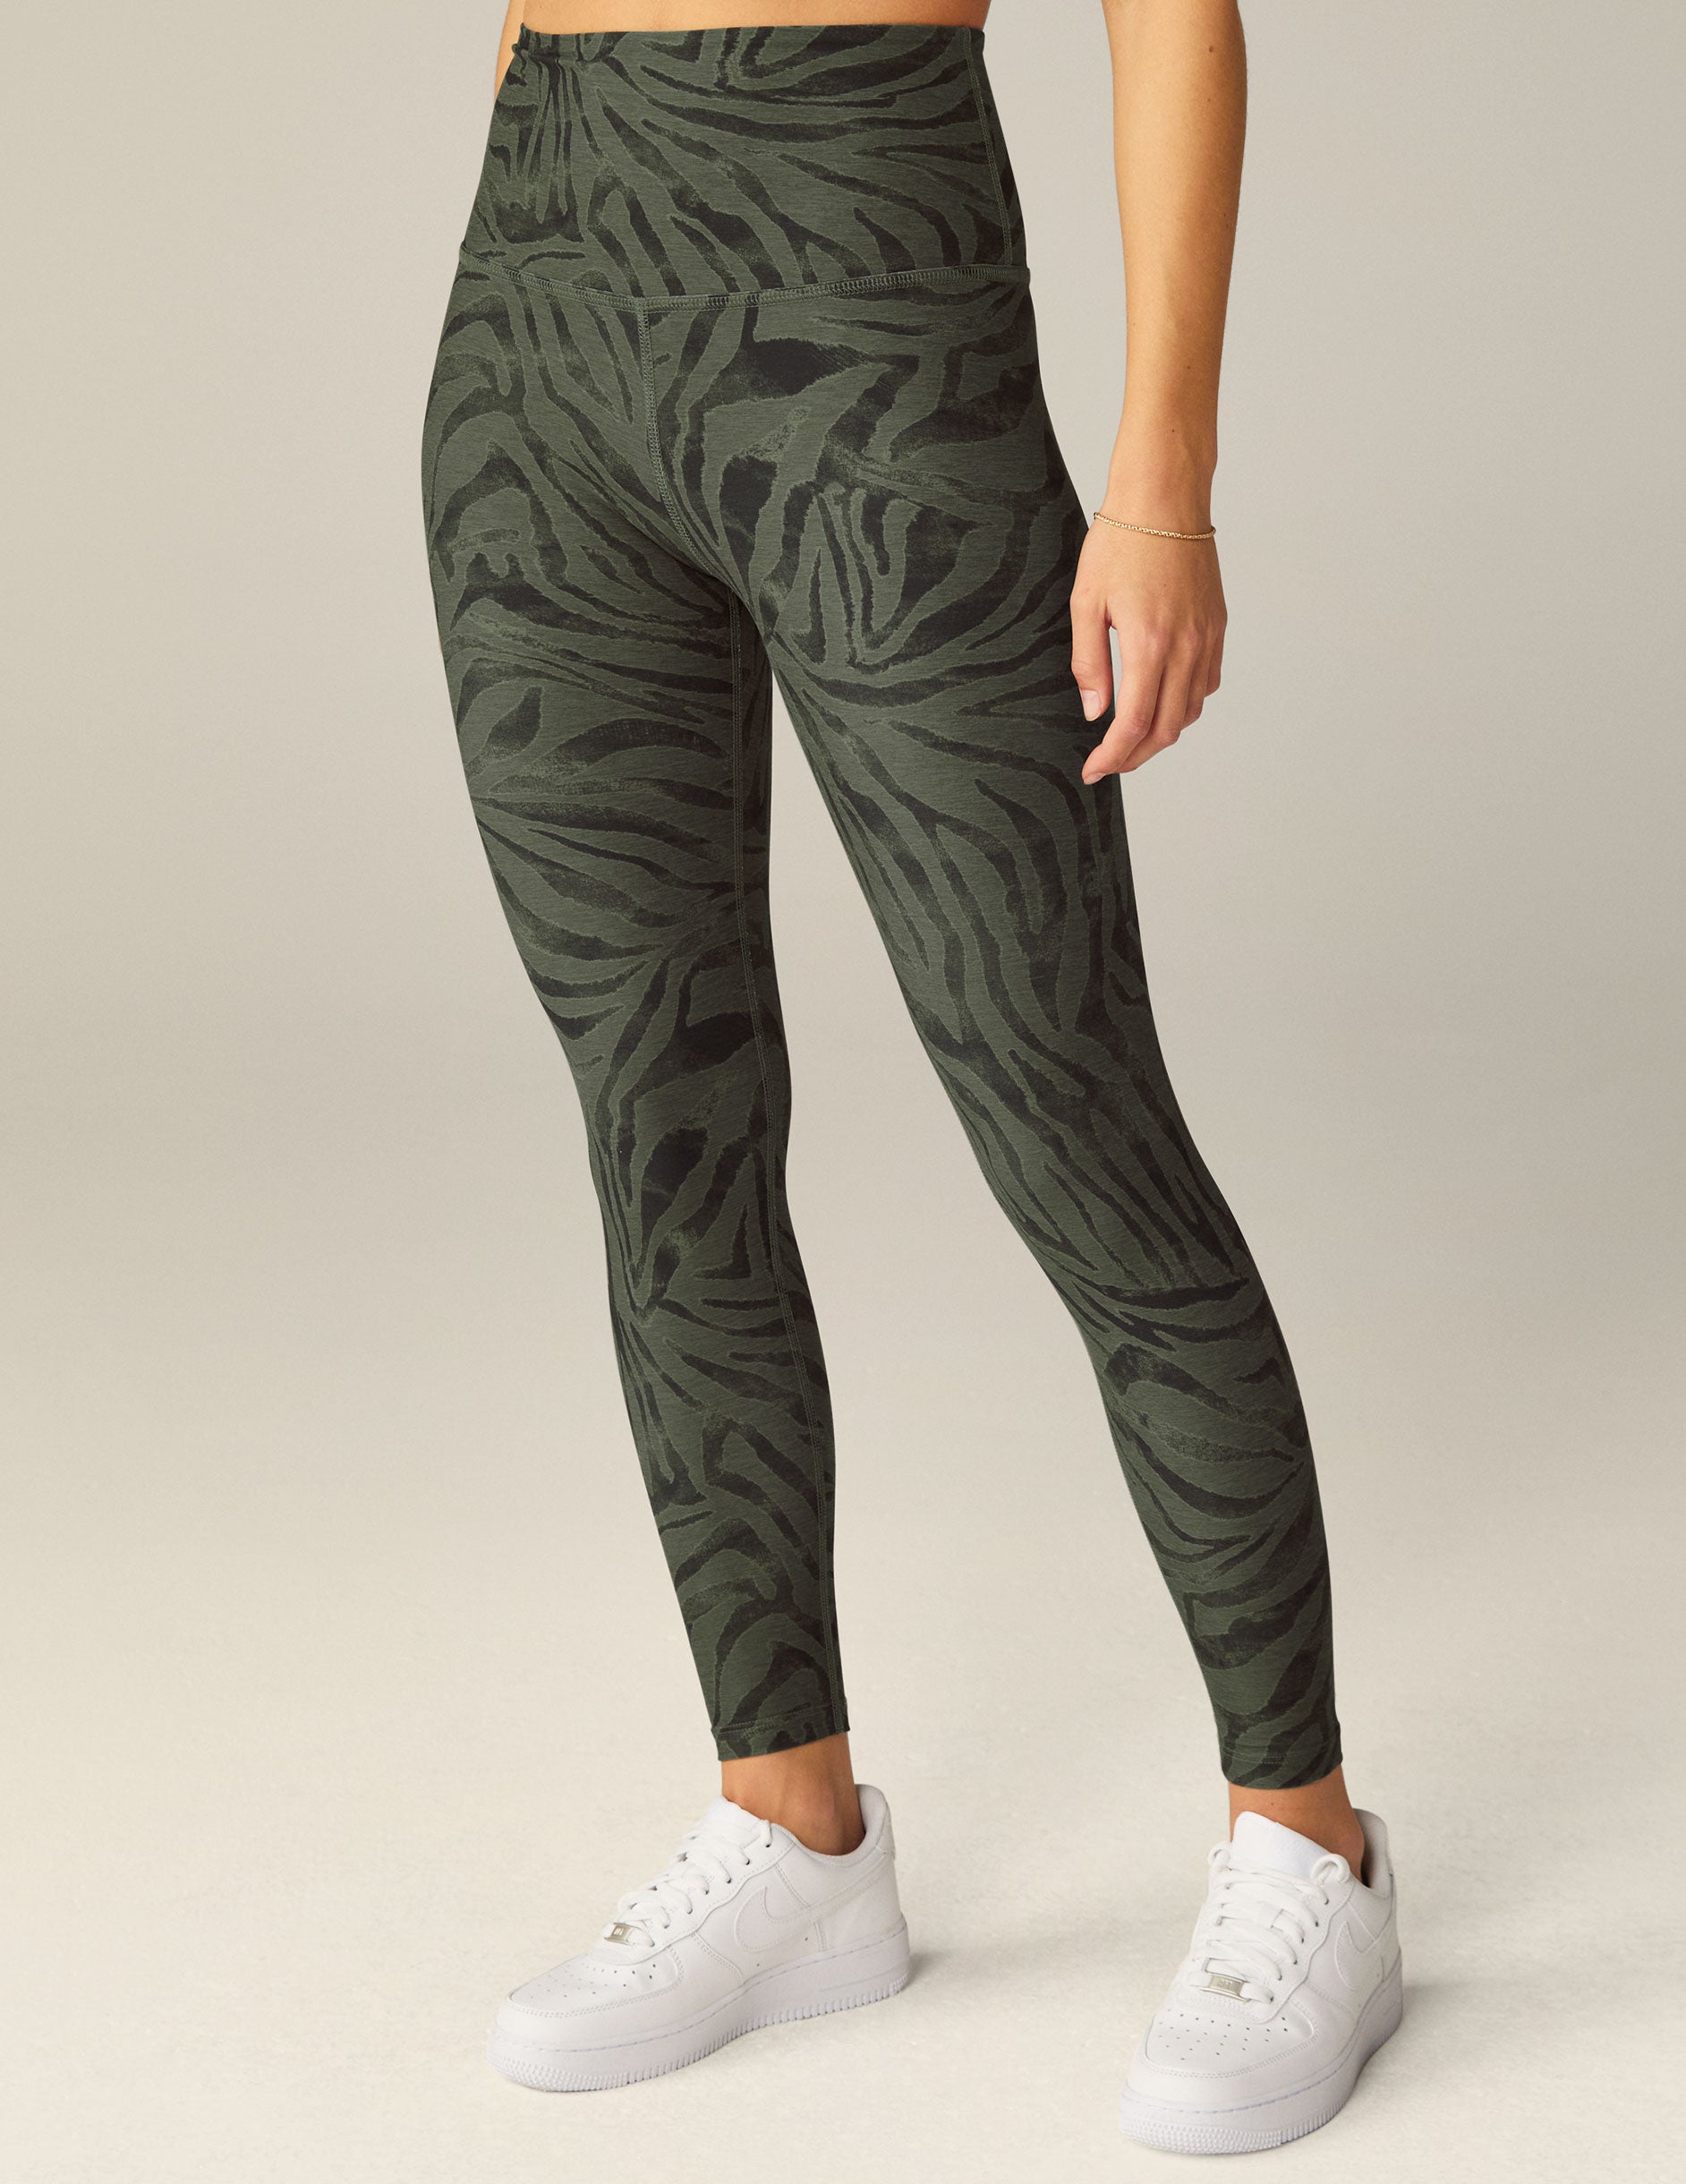 Fabletics, Pants & Jumpsuits, Green Fabletics Mesh 34 Power Hold Cropped  Leggings Size 4